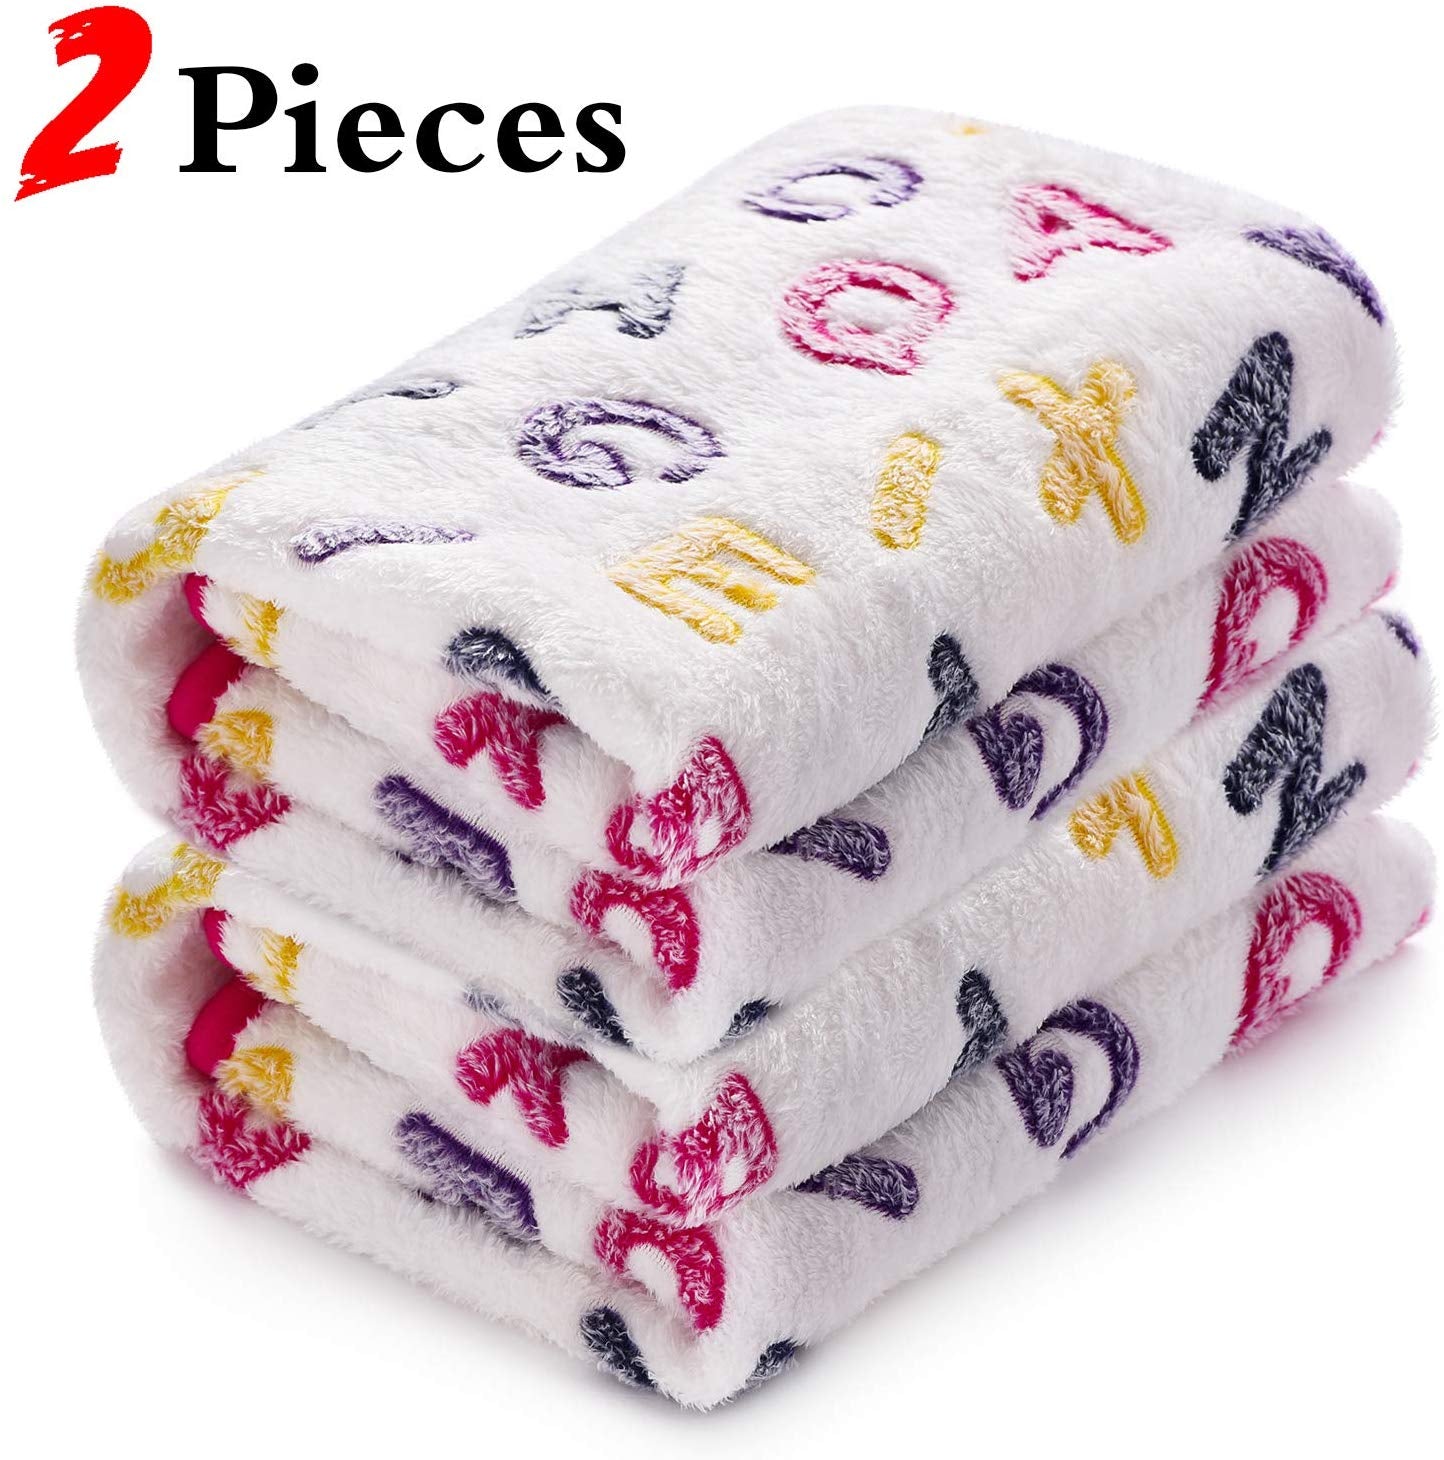 LUXMO 2 Pack Dog Cat Puppy Blanket Warm Soft Pet Blankets Sleep Mat Bed Cover with Paw Print for Dog Cat Puppy Kitten and Other Small Animals